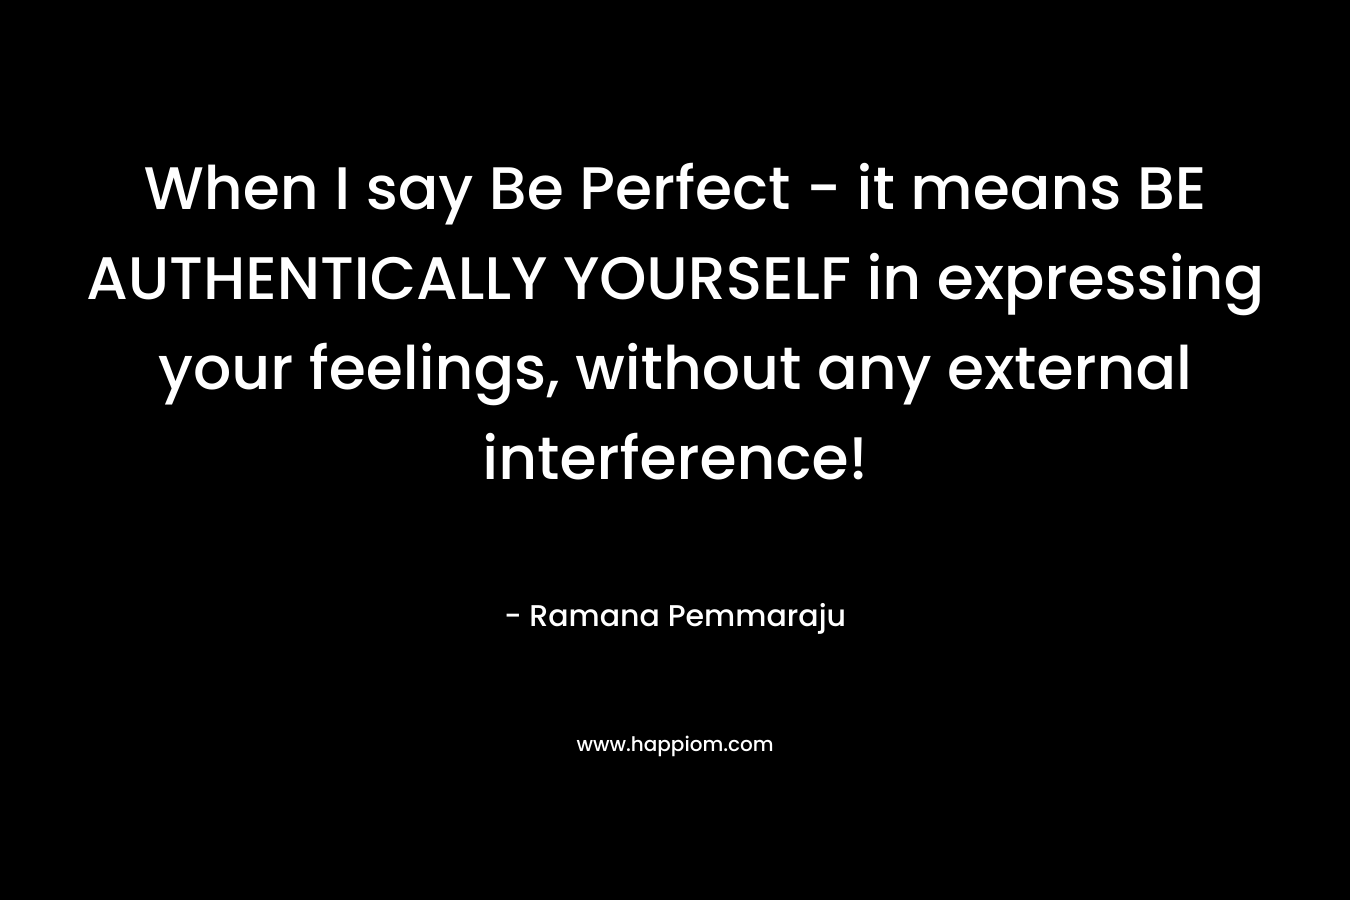 When I say Be Perfect - it means BE AUTHENTICALLY YOURSELF in expressing your feelings, without any external interference!